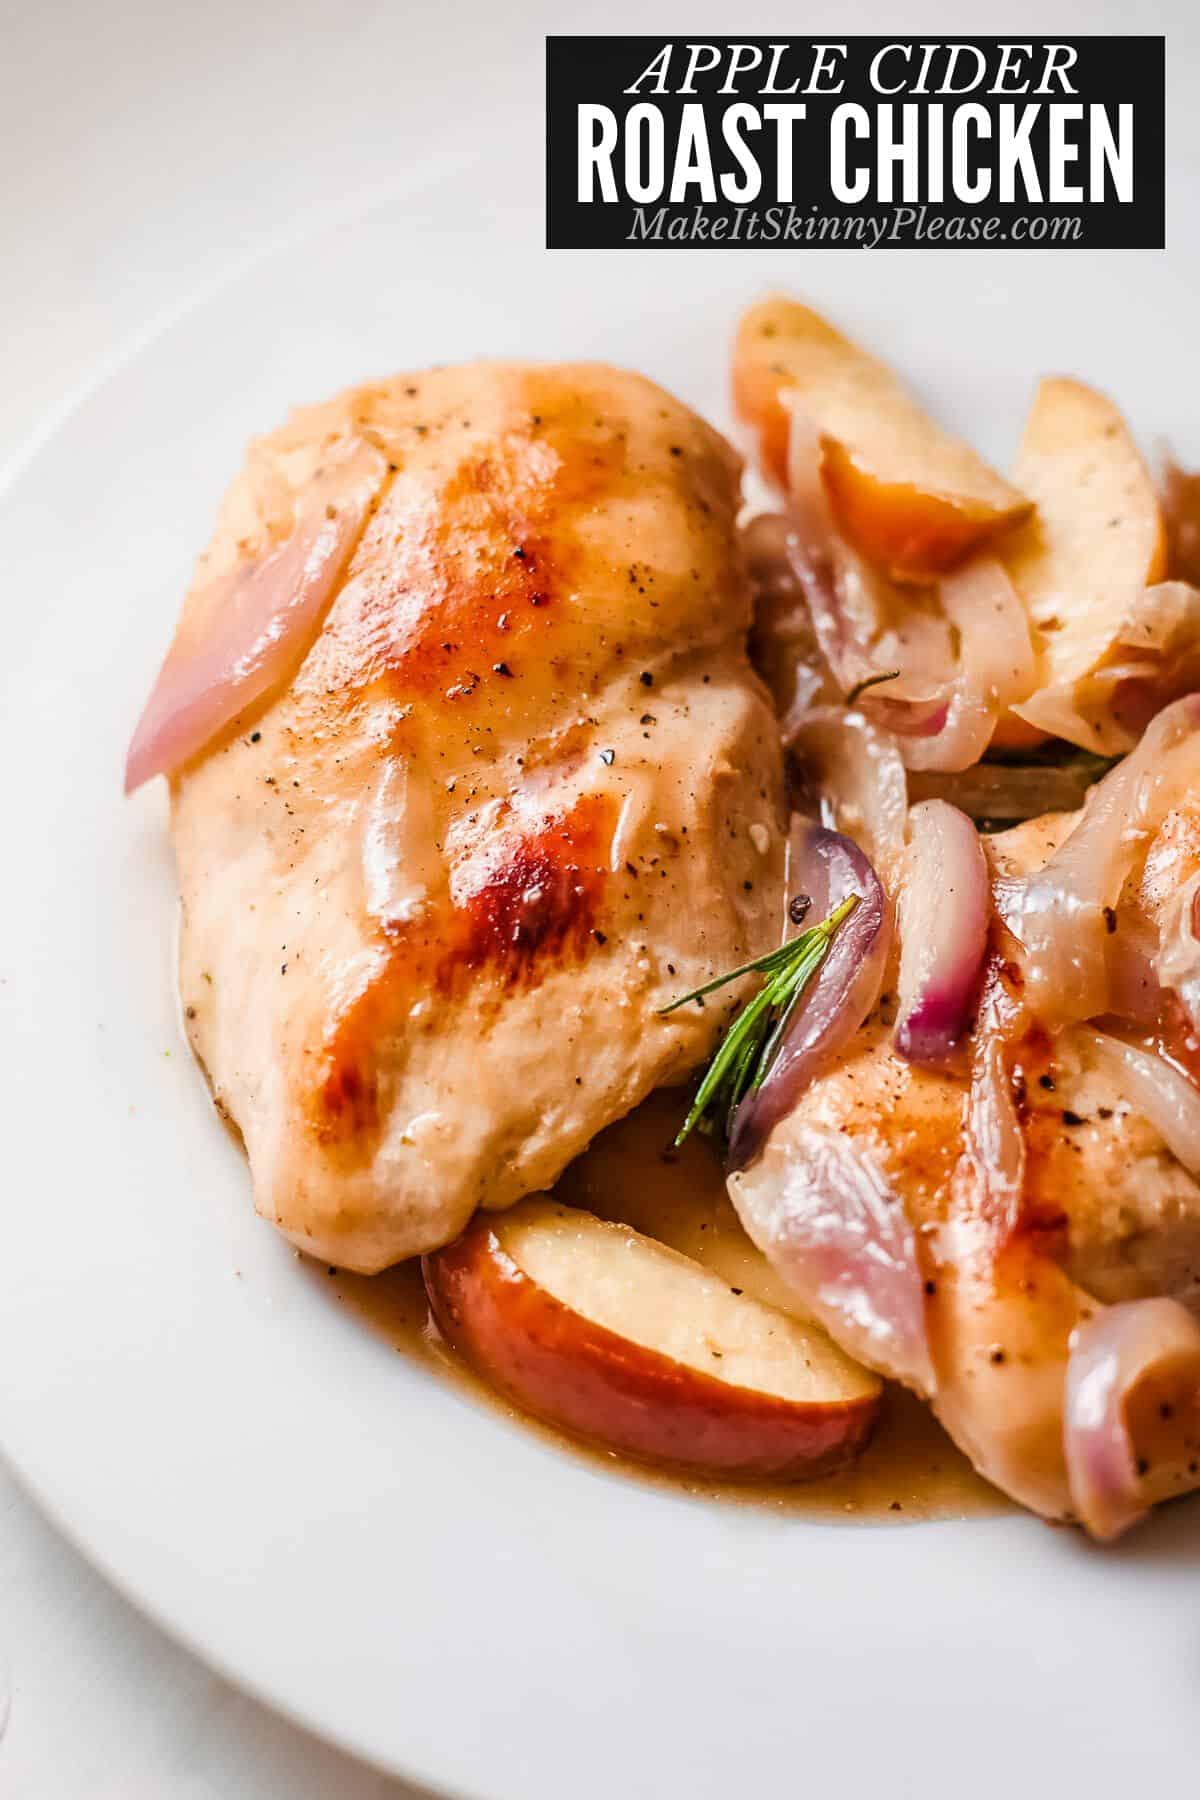 Roast Chicken with apples